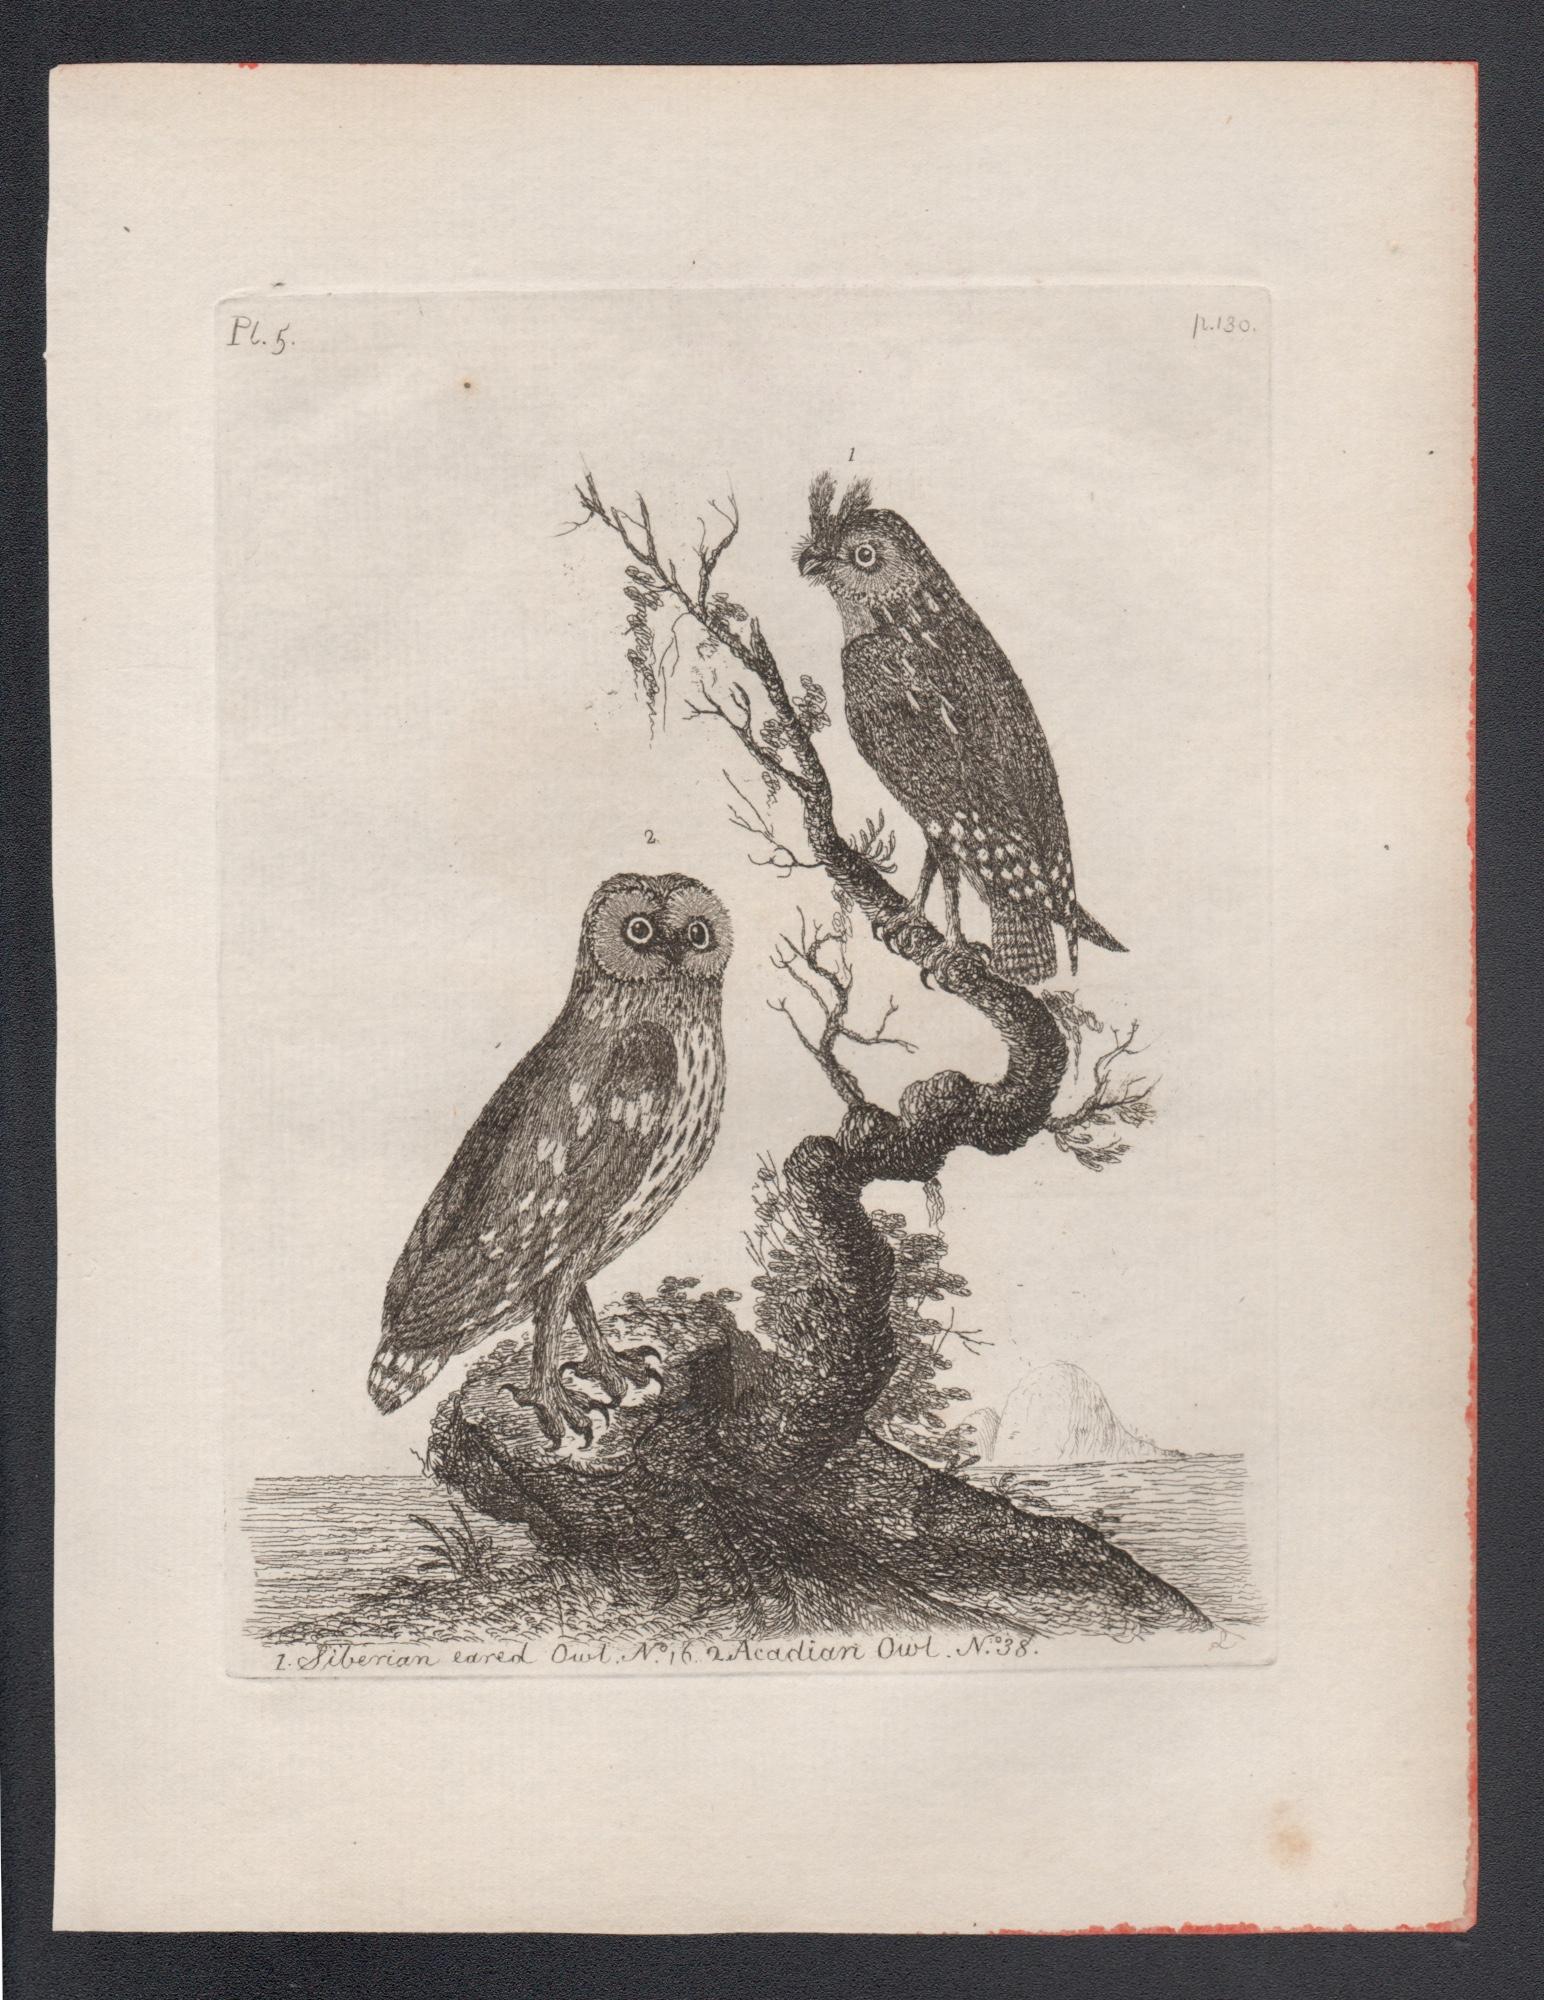 Siberian eared Owl and Acadian Owl, 18th century bird engraving by John Latham For Sale 1